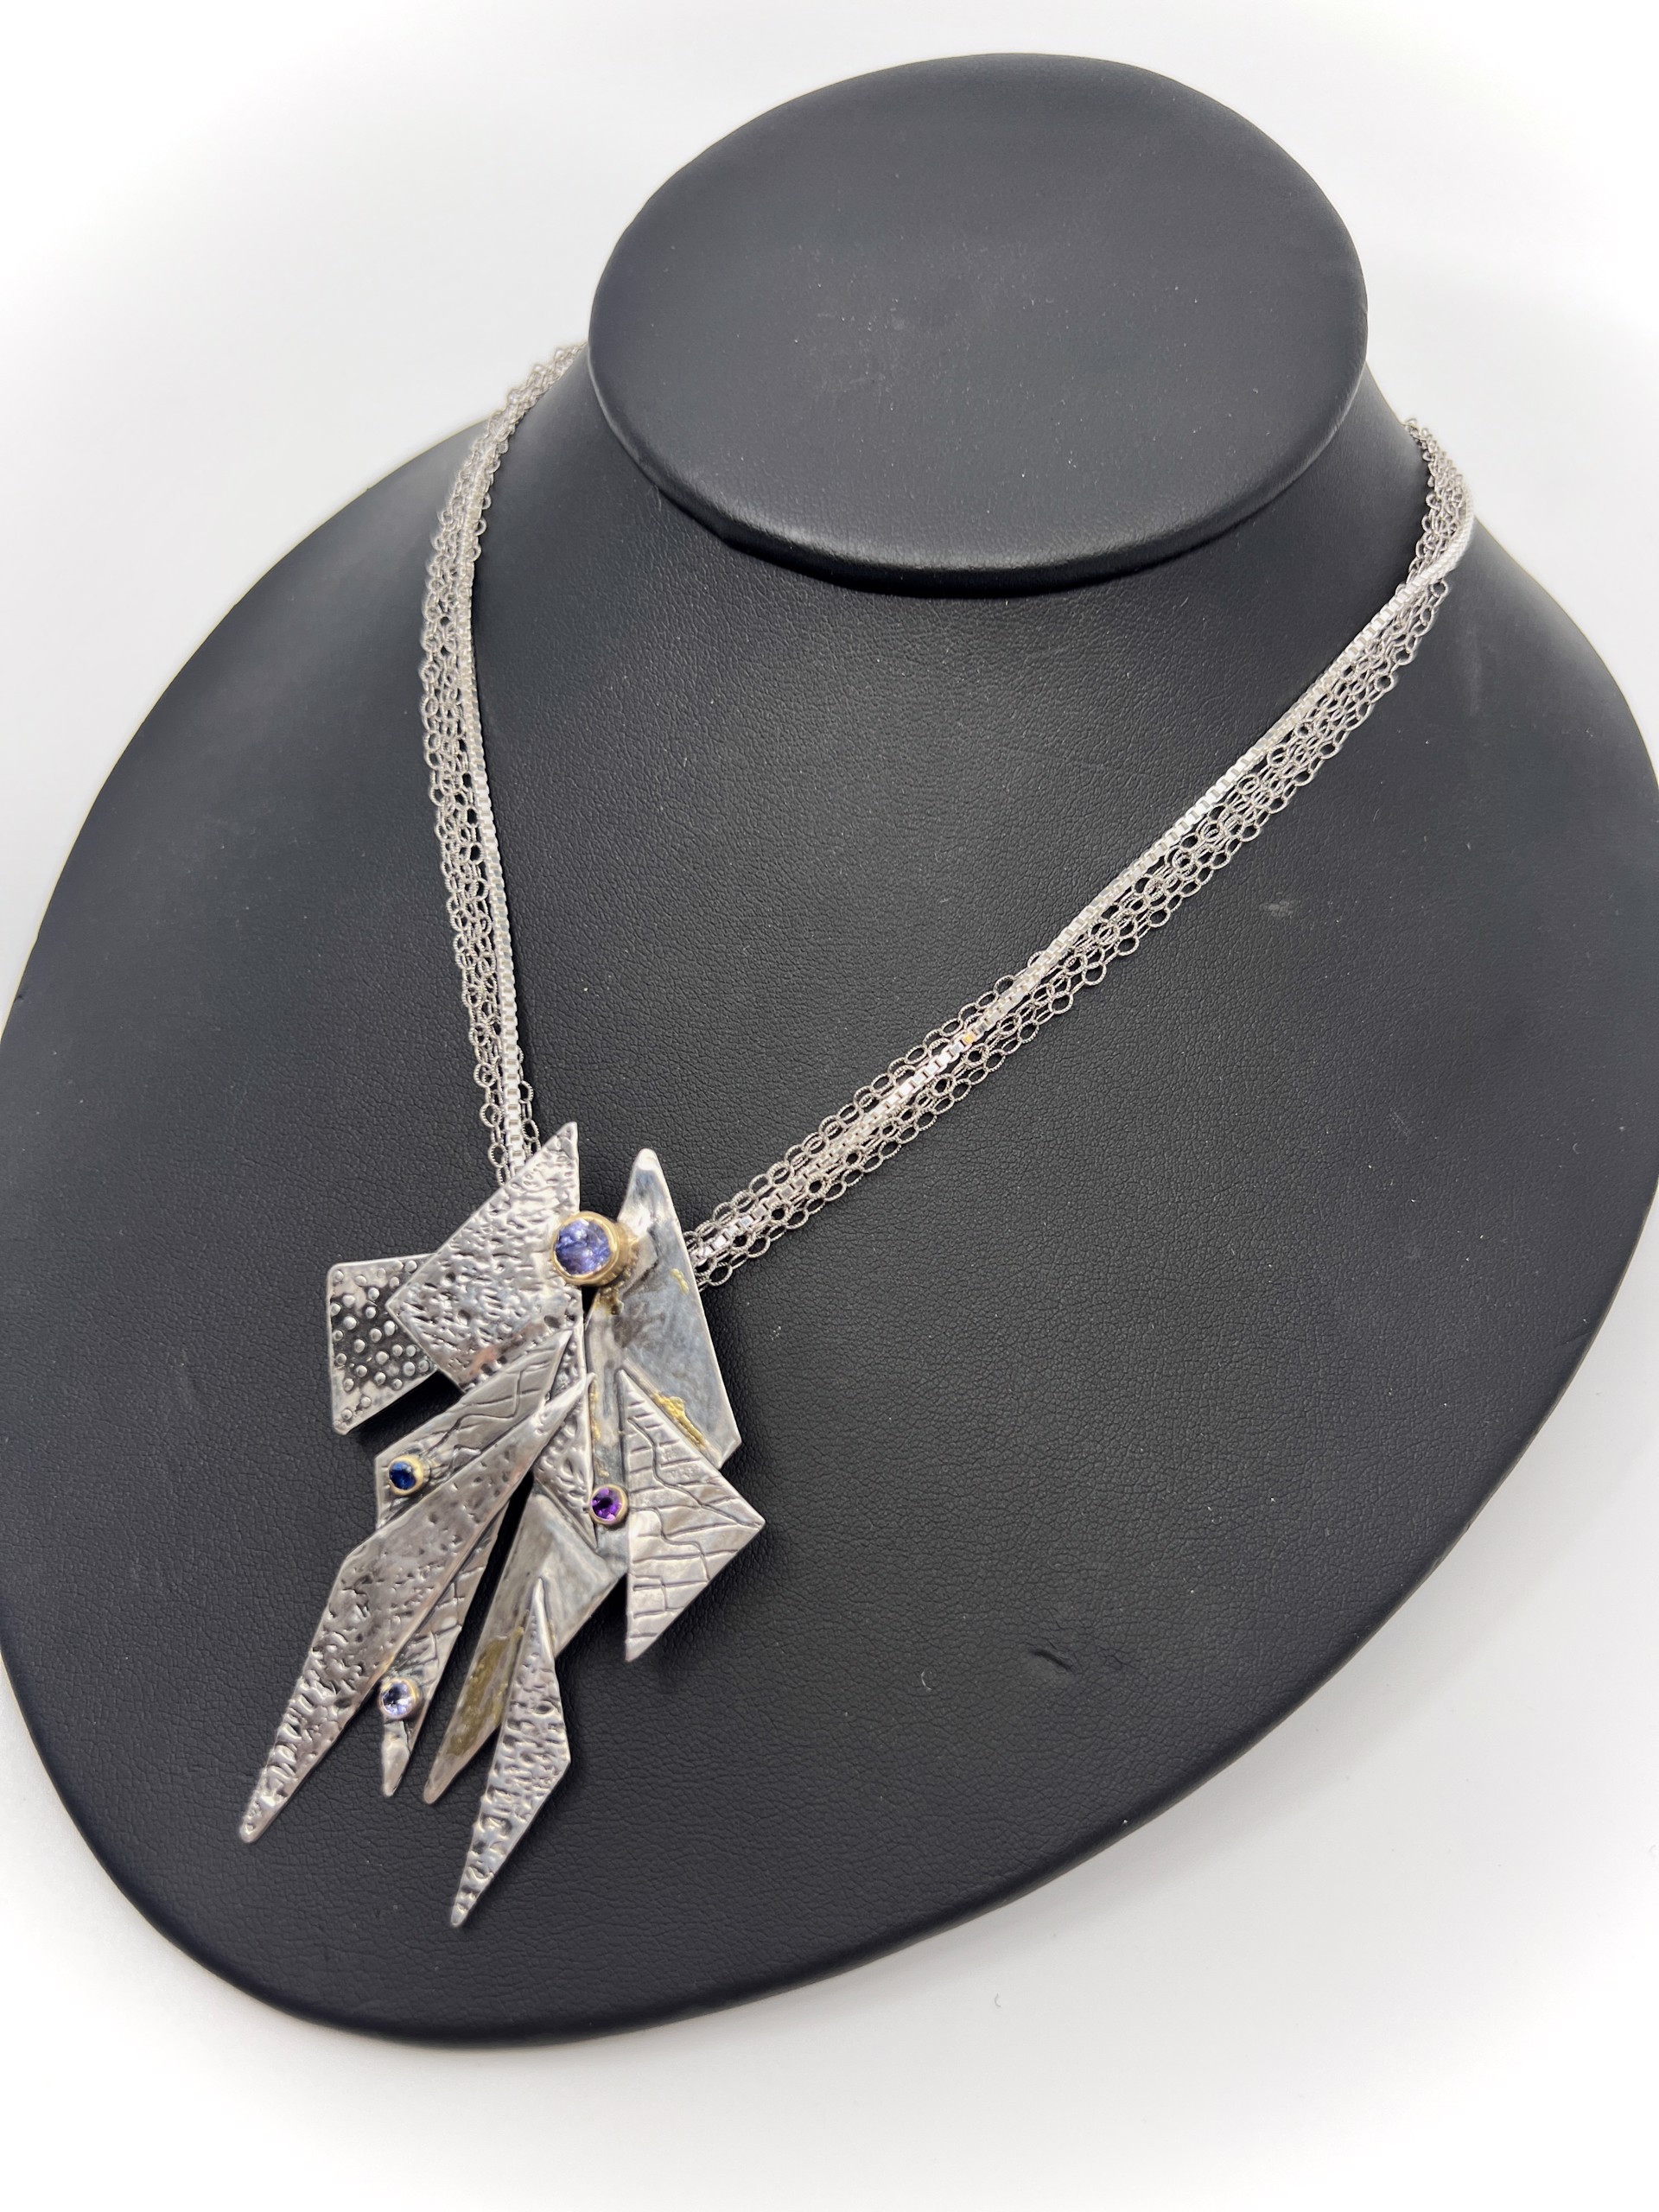 9602 Silver and Gold Multi-Triangle Pendant with Tranzanite, Saphire, and Garnet with Double Chain by Beth Benowich